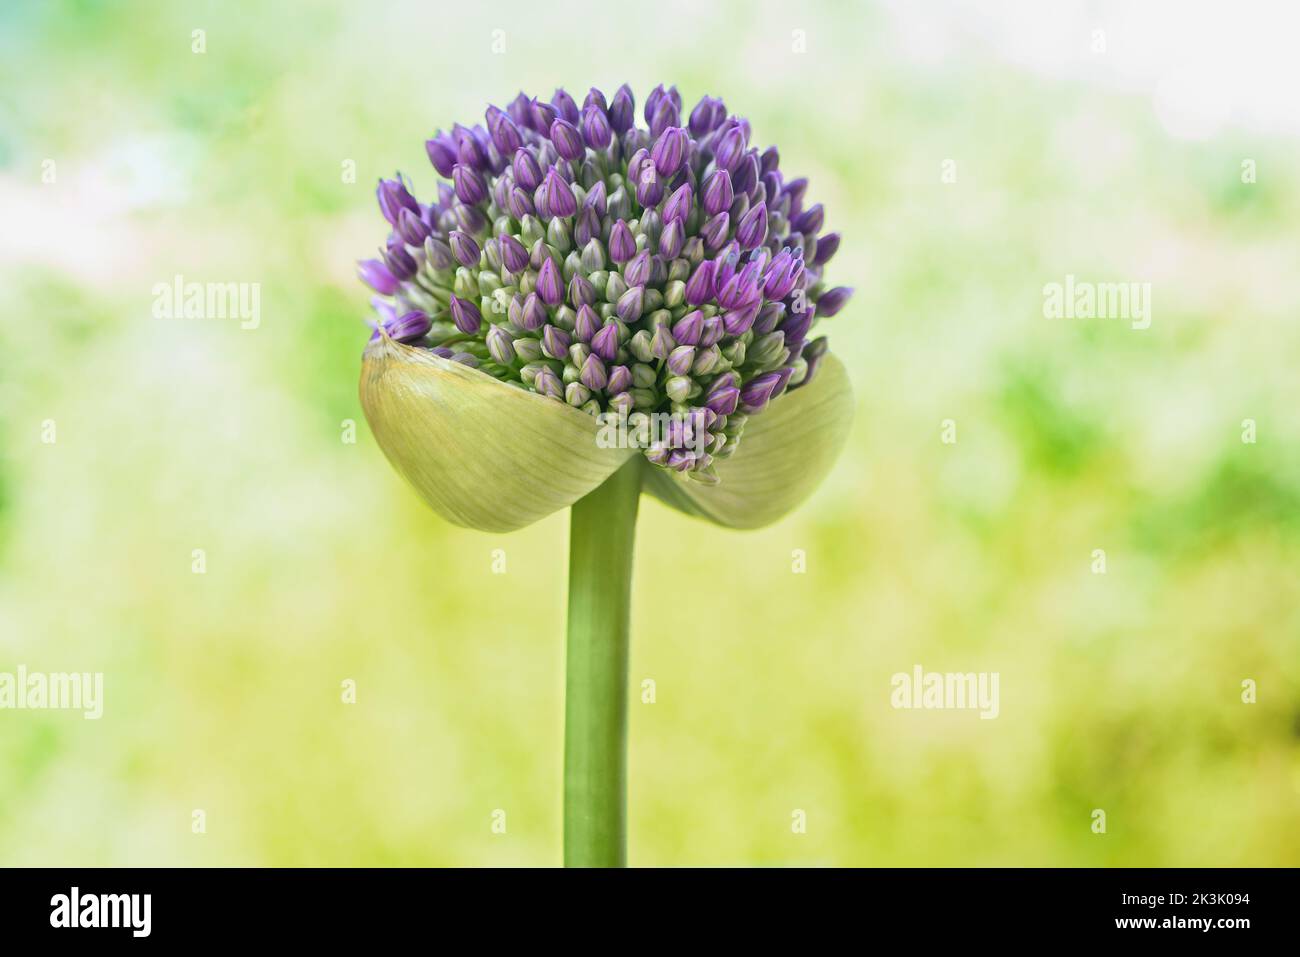 Giant onion flower head on blurred background Stock Photo